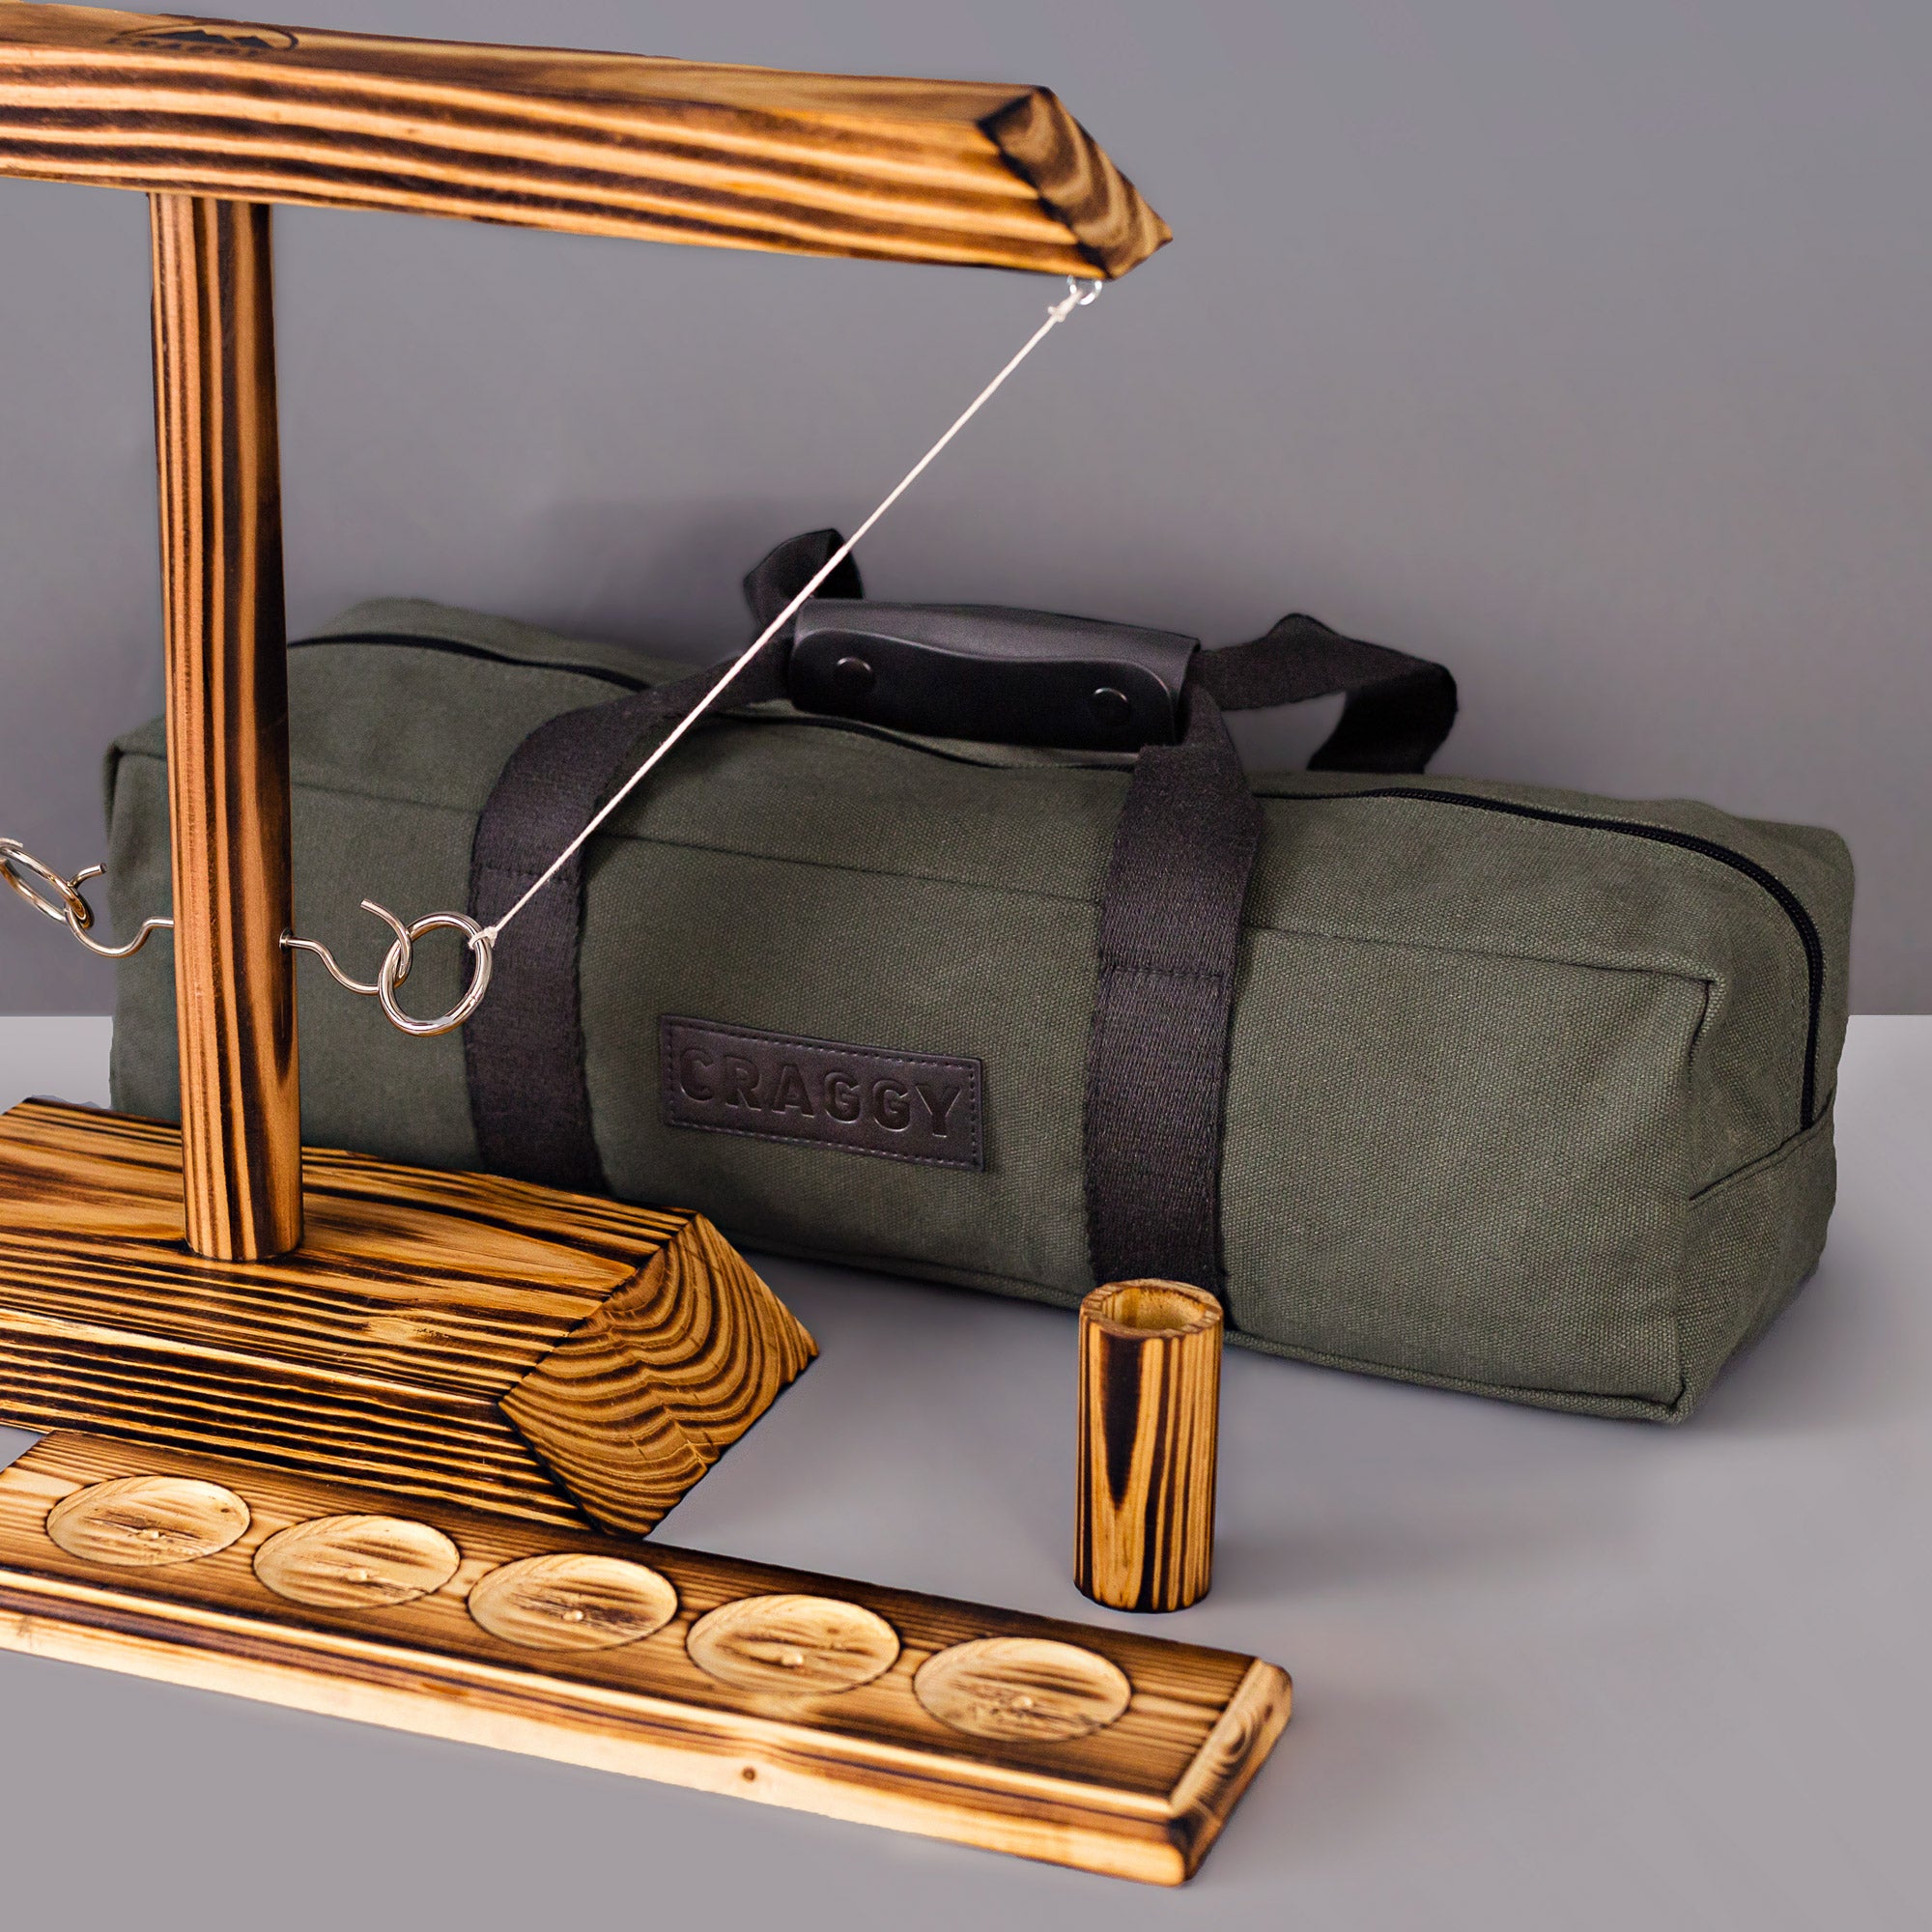 The new Shot Ladder® for HOOKS! XPLR is foldable to fit in the